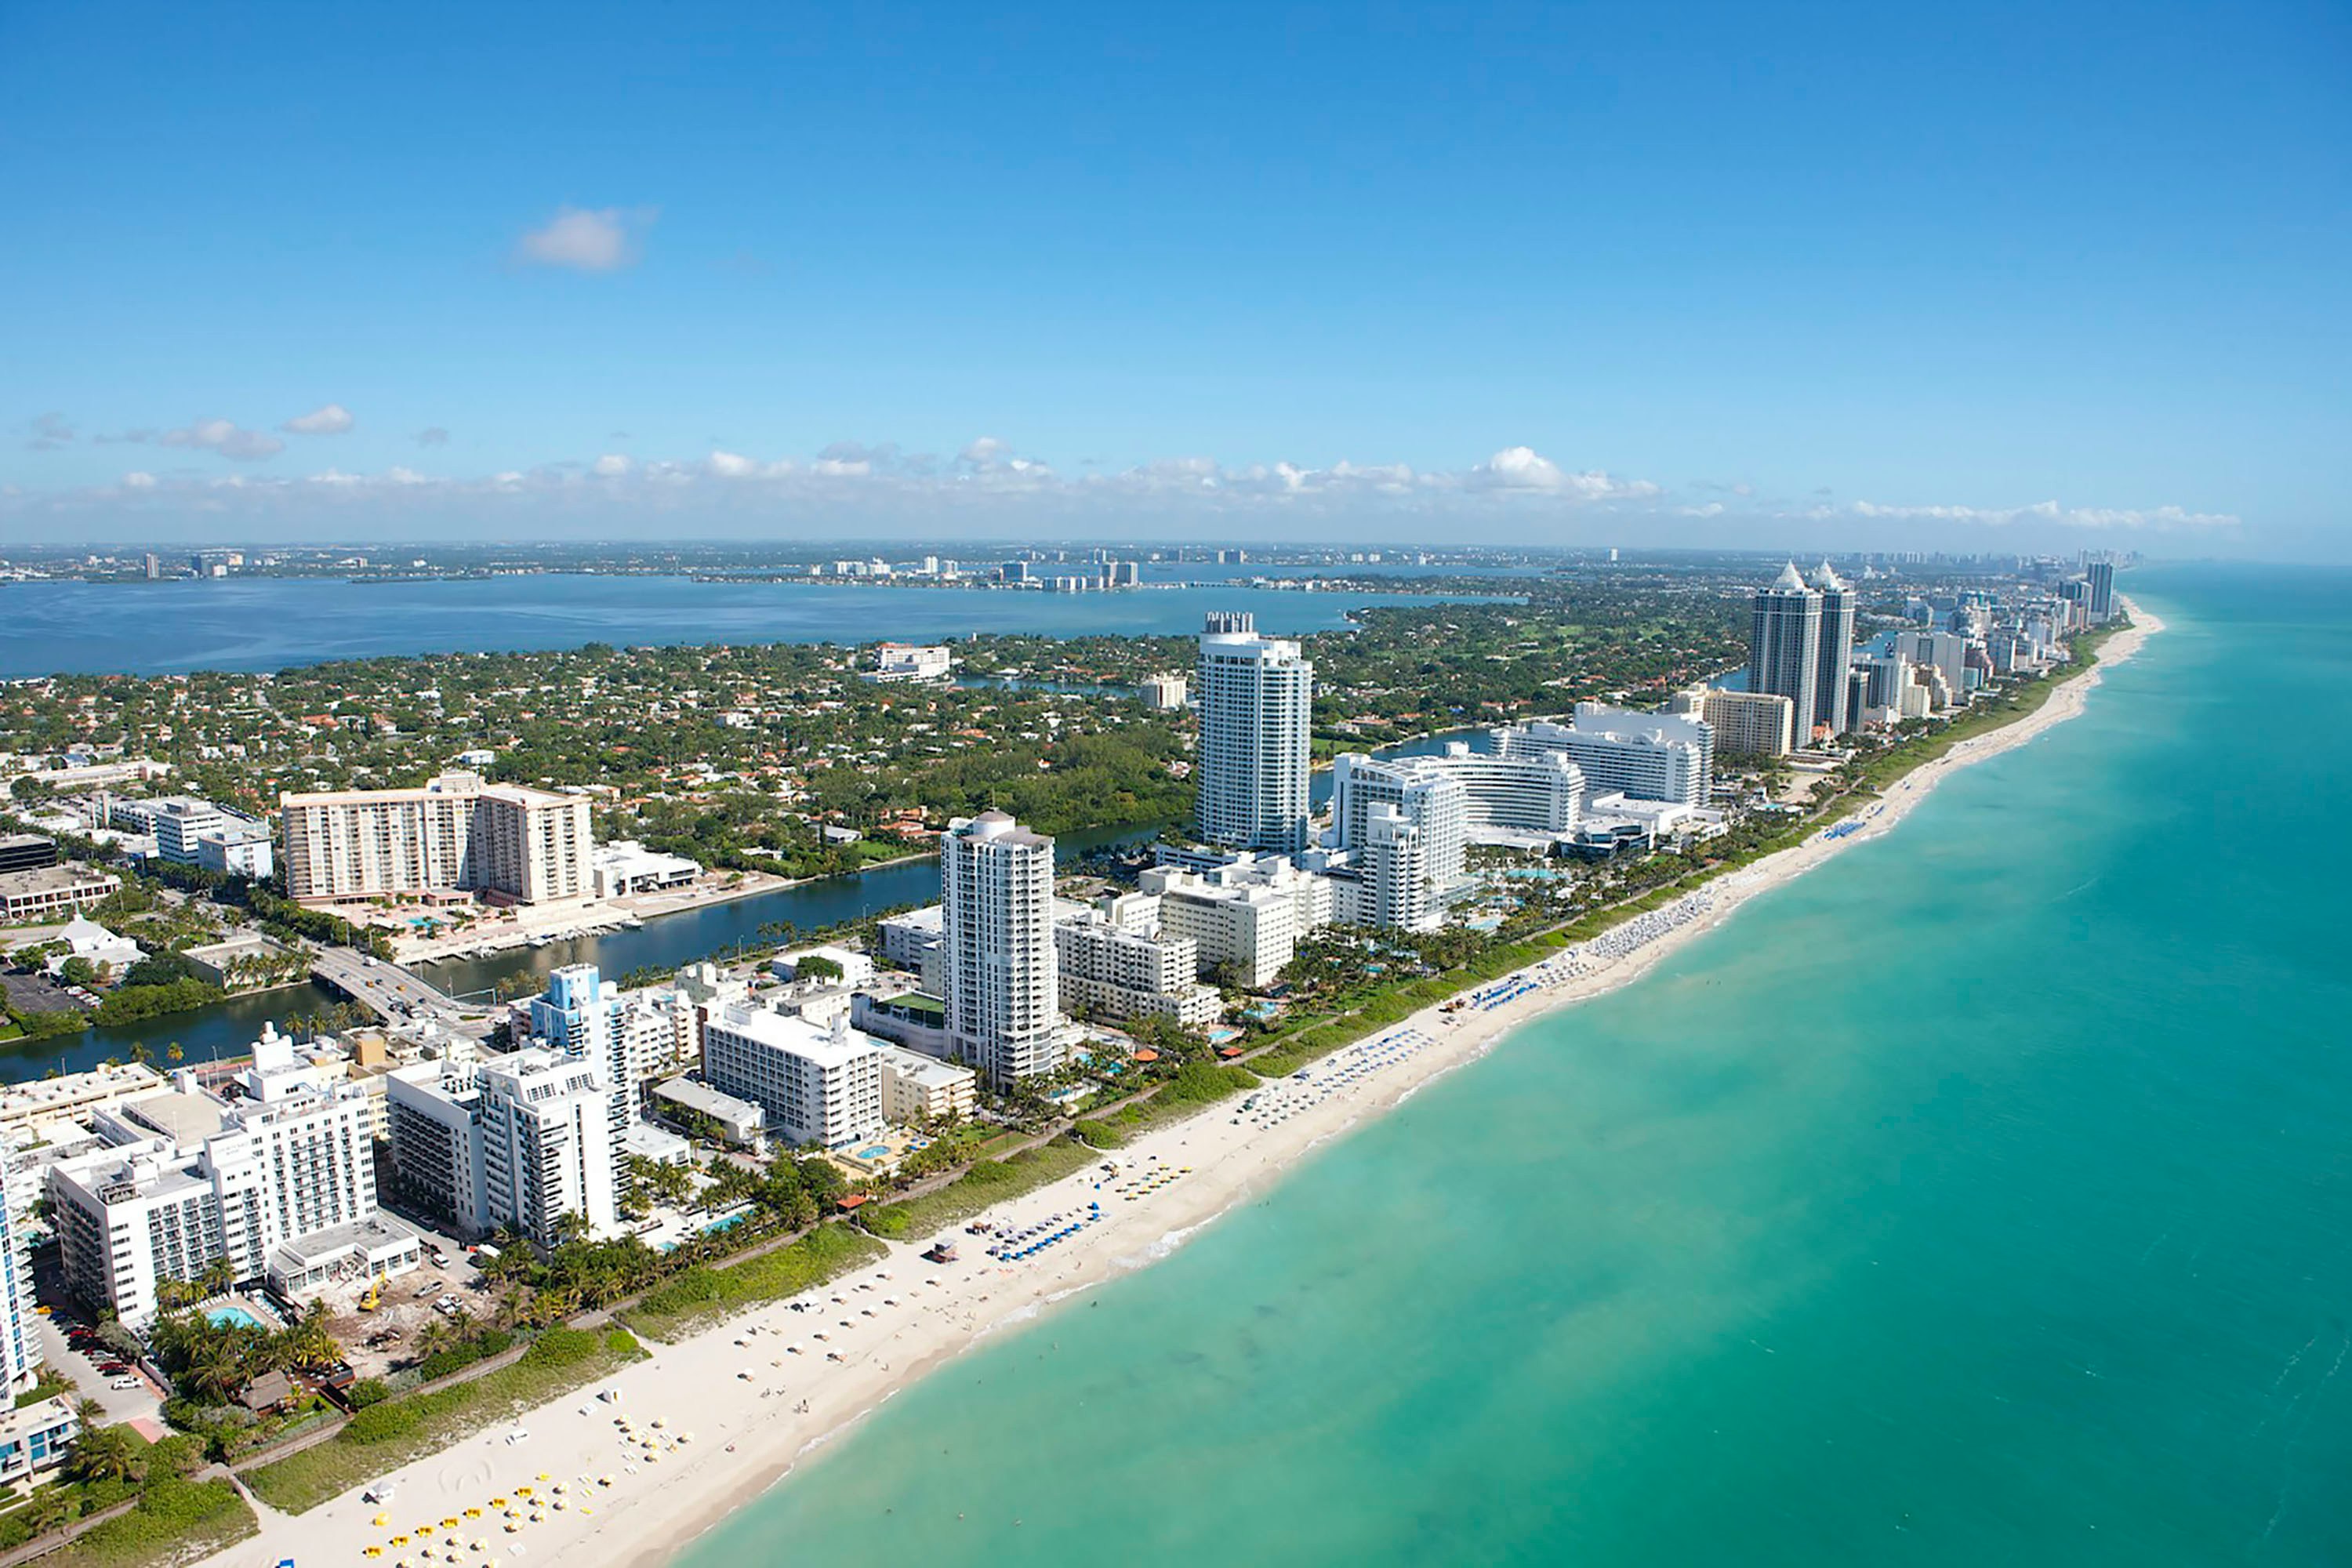 Real estate prices continued to increase in Miami-Dade and there are no signs of cooling